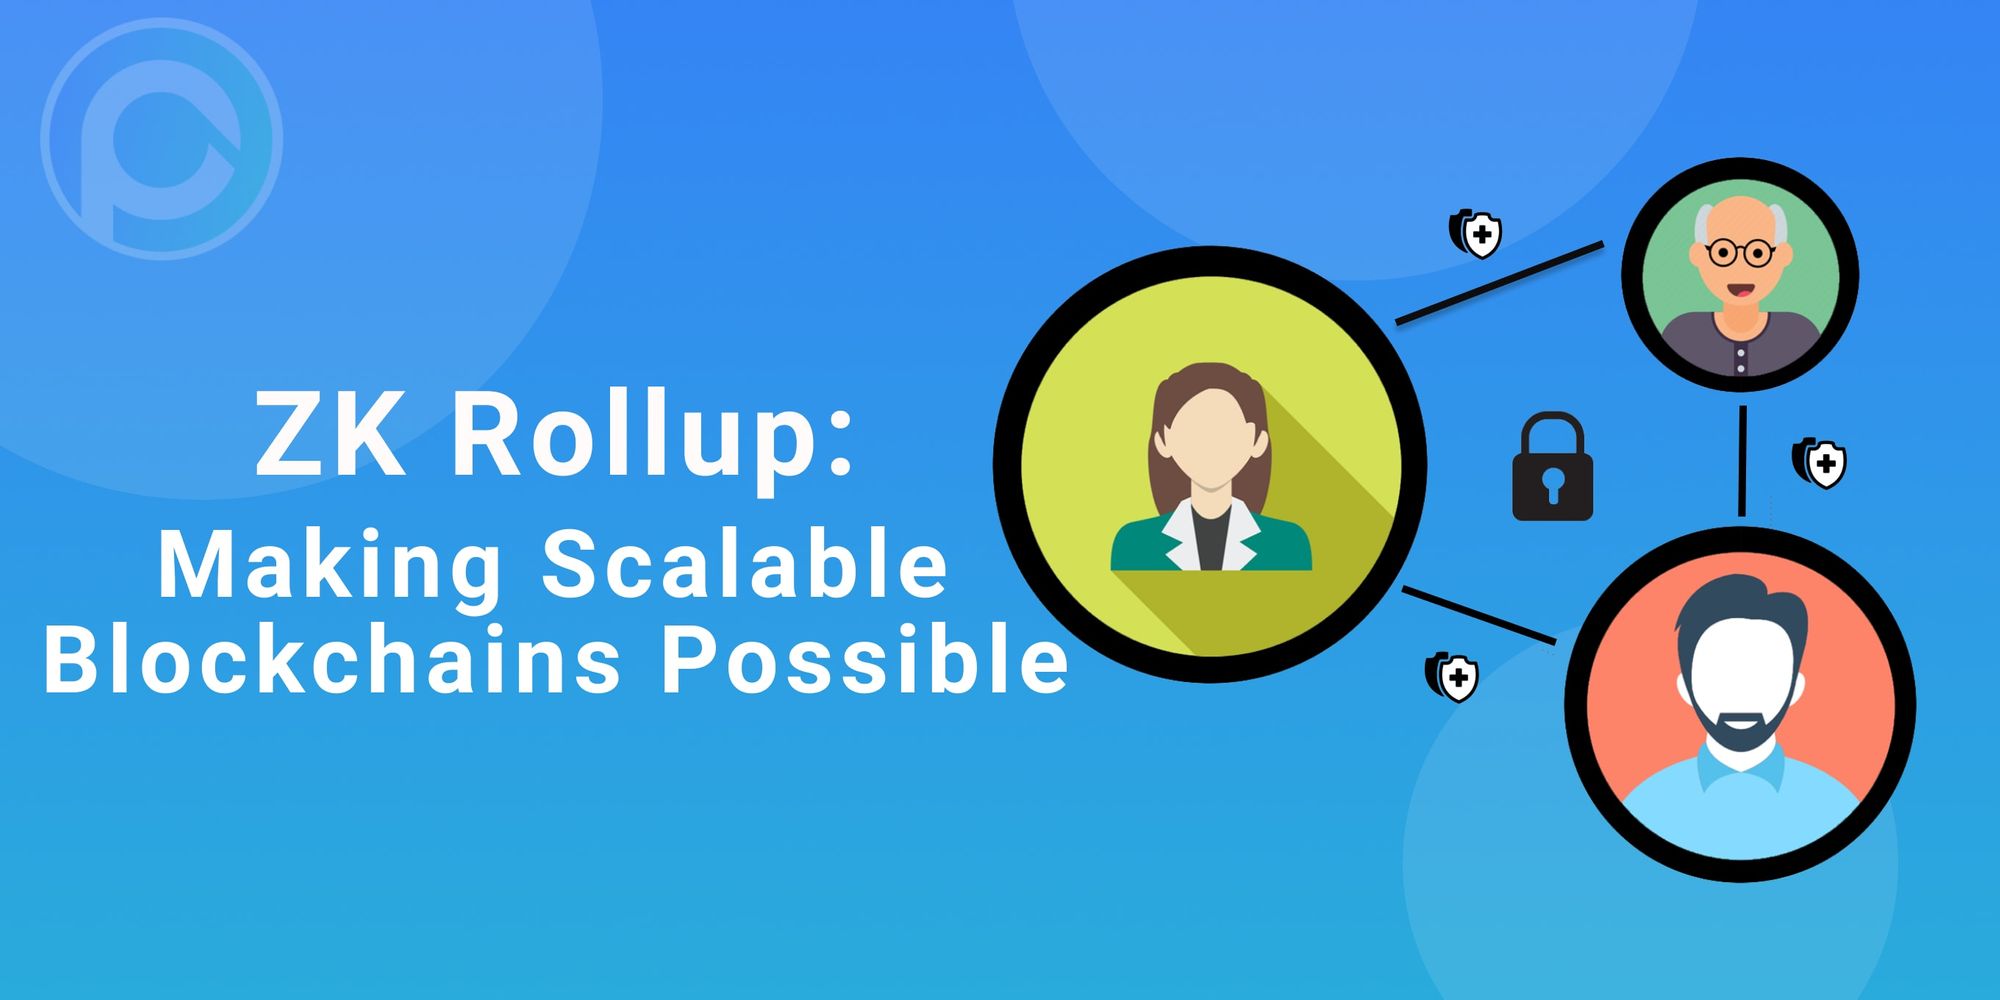 ZK Rollup: Making Scalable Blockchains Possible